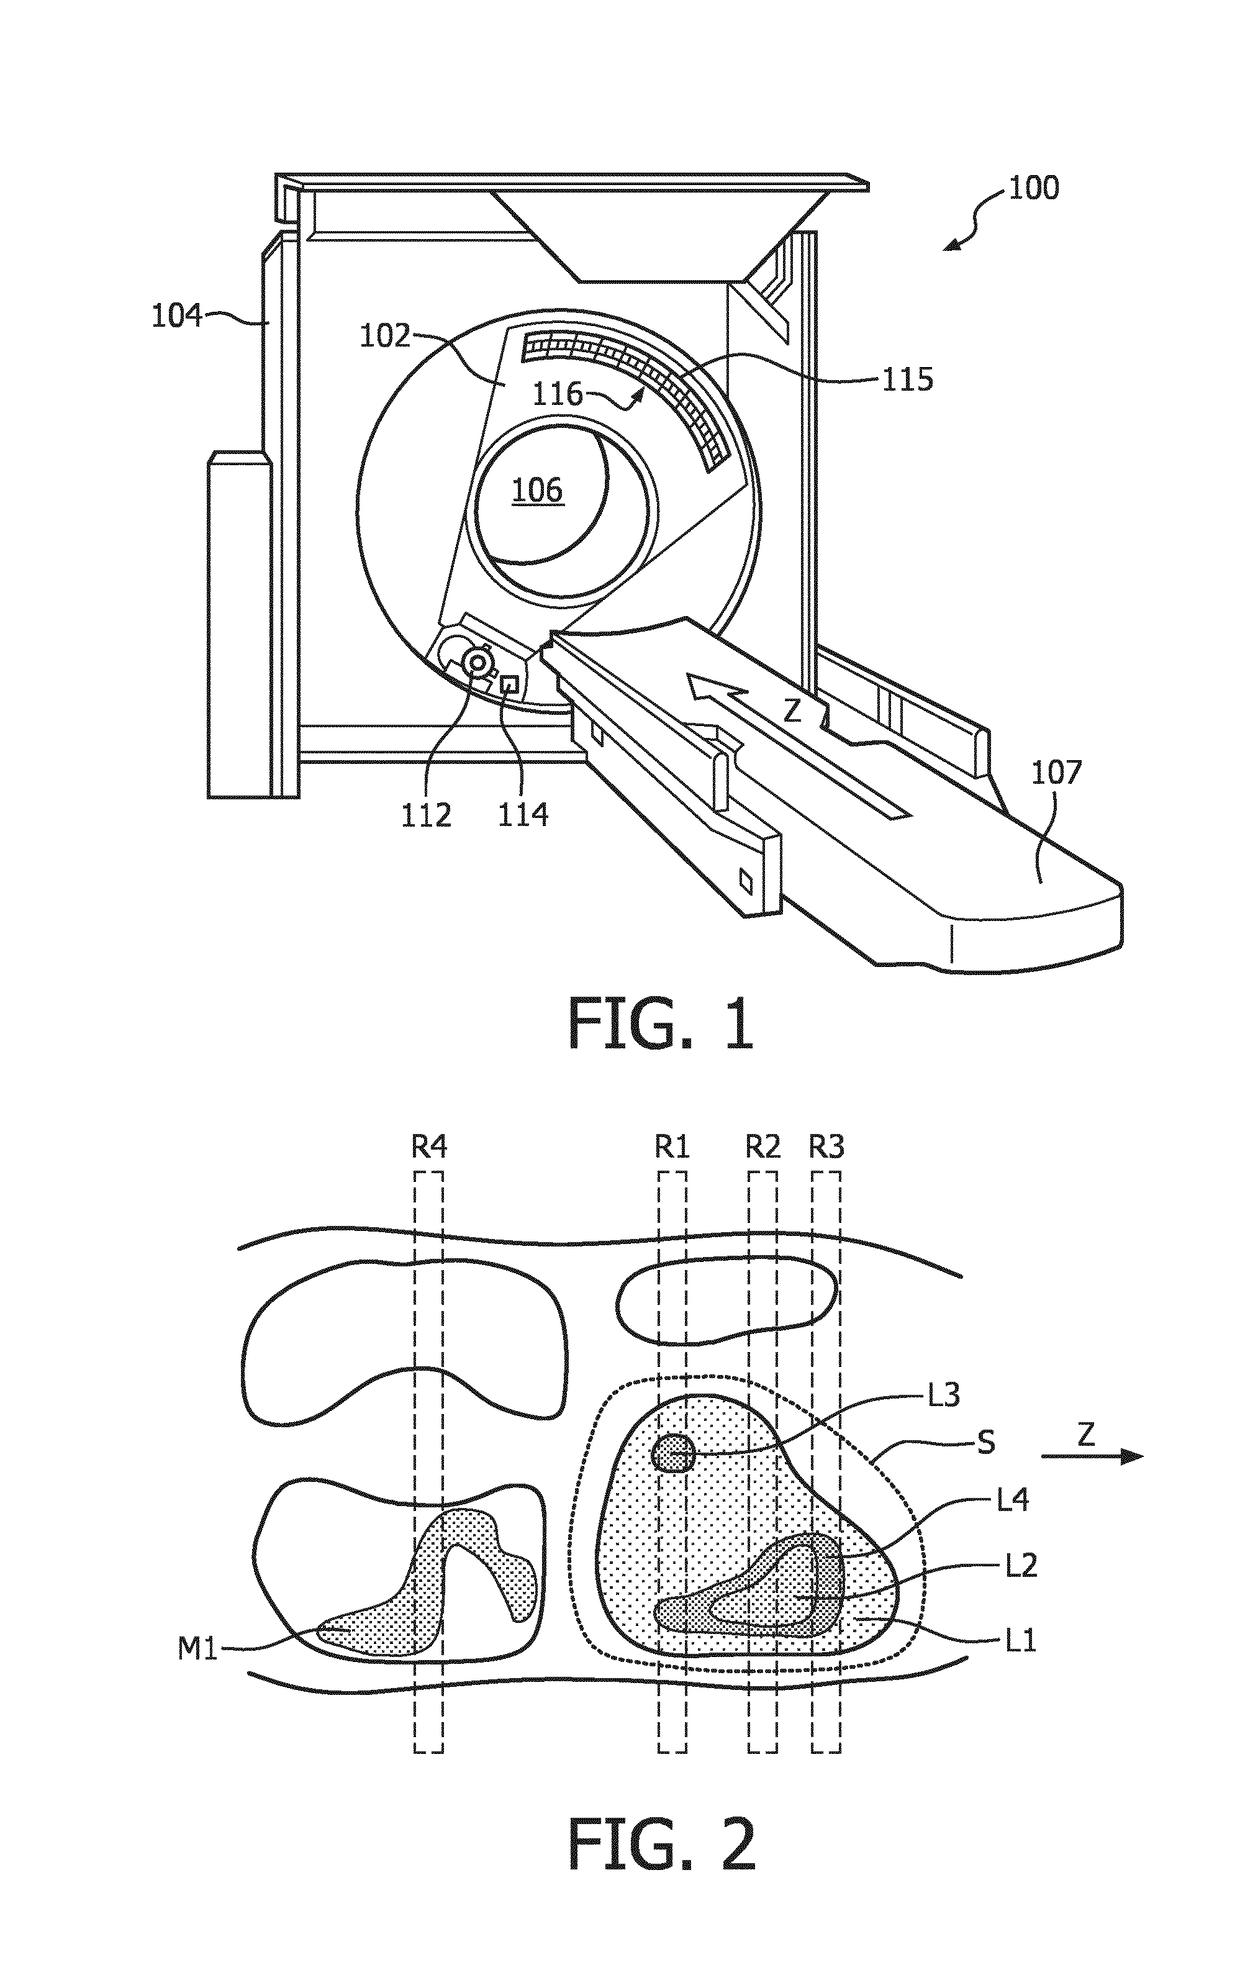 Method and device for a medical image analysis